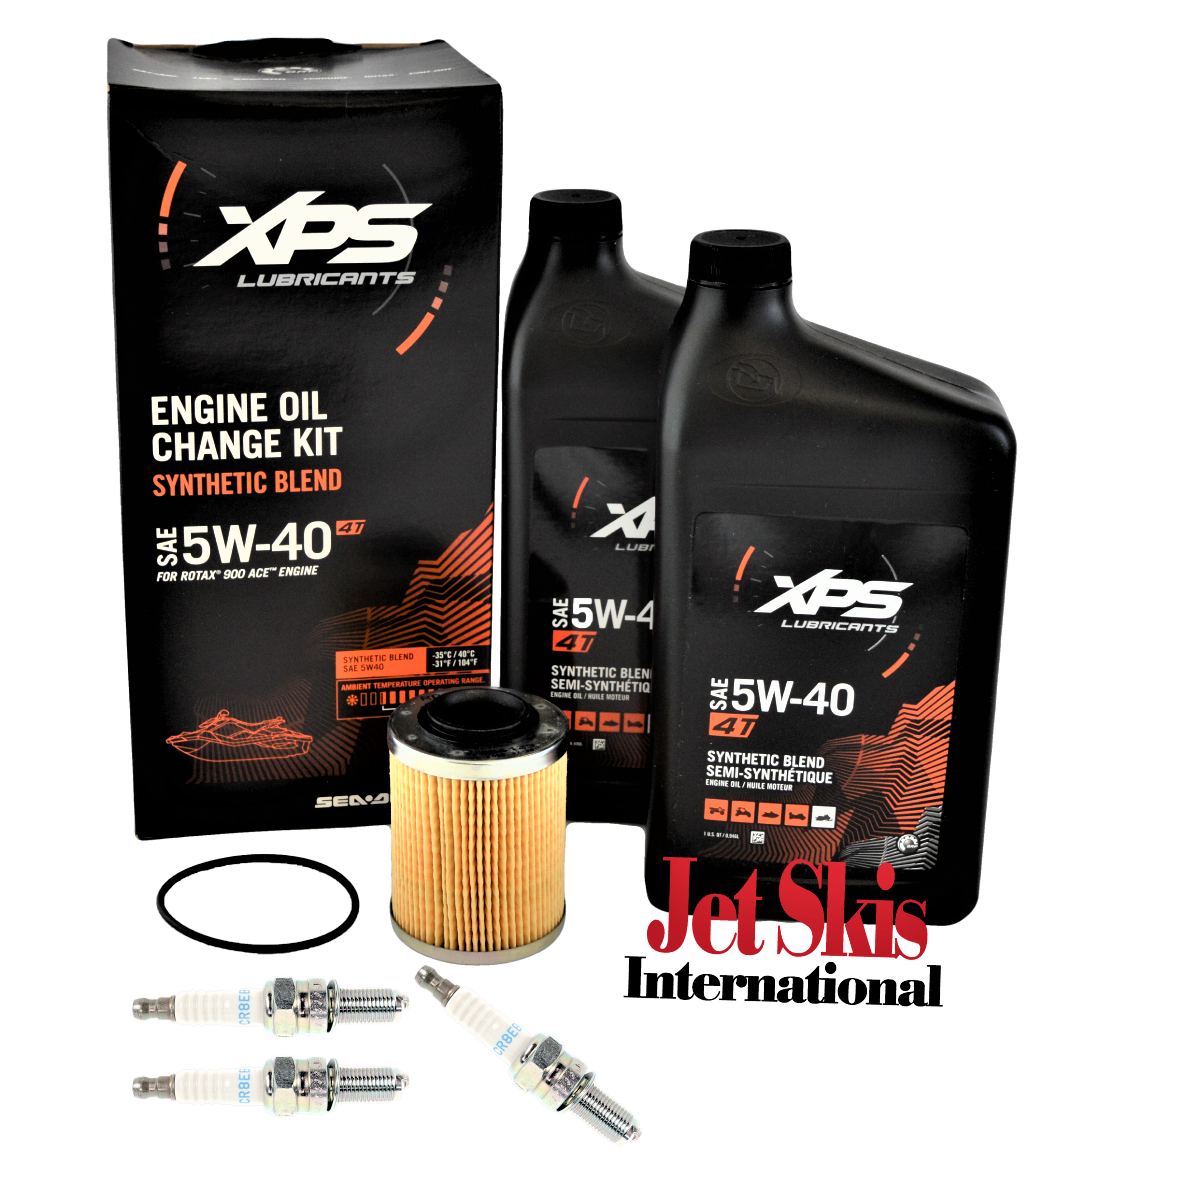 Sea-doo Oem Xps Oil Change, Filter, And Plug Kit Spark Ace 900 Pwc 295501138